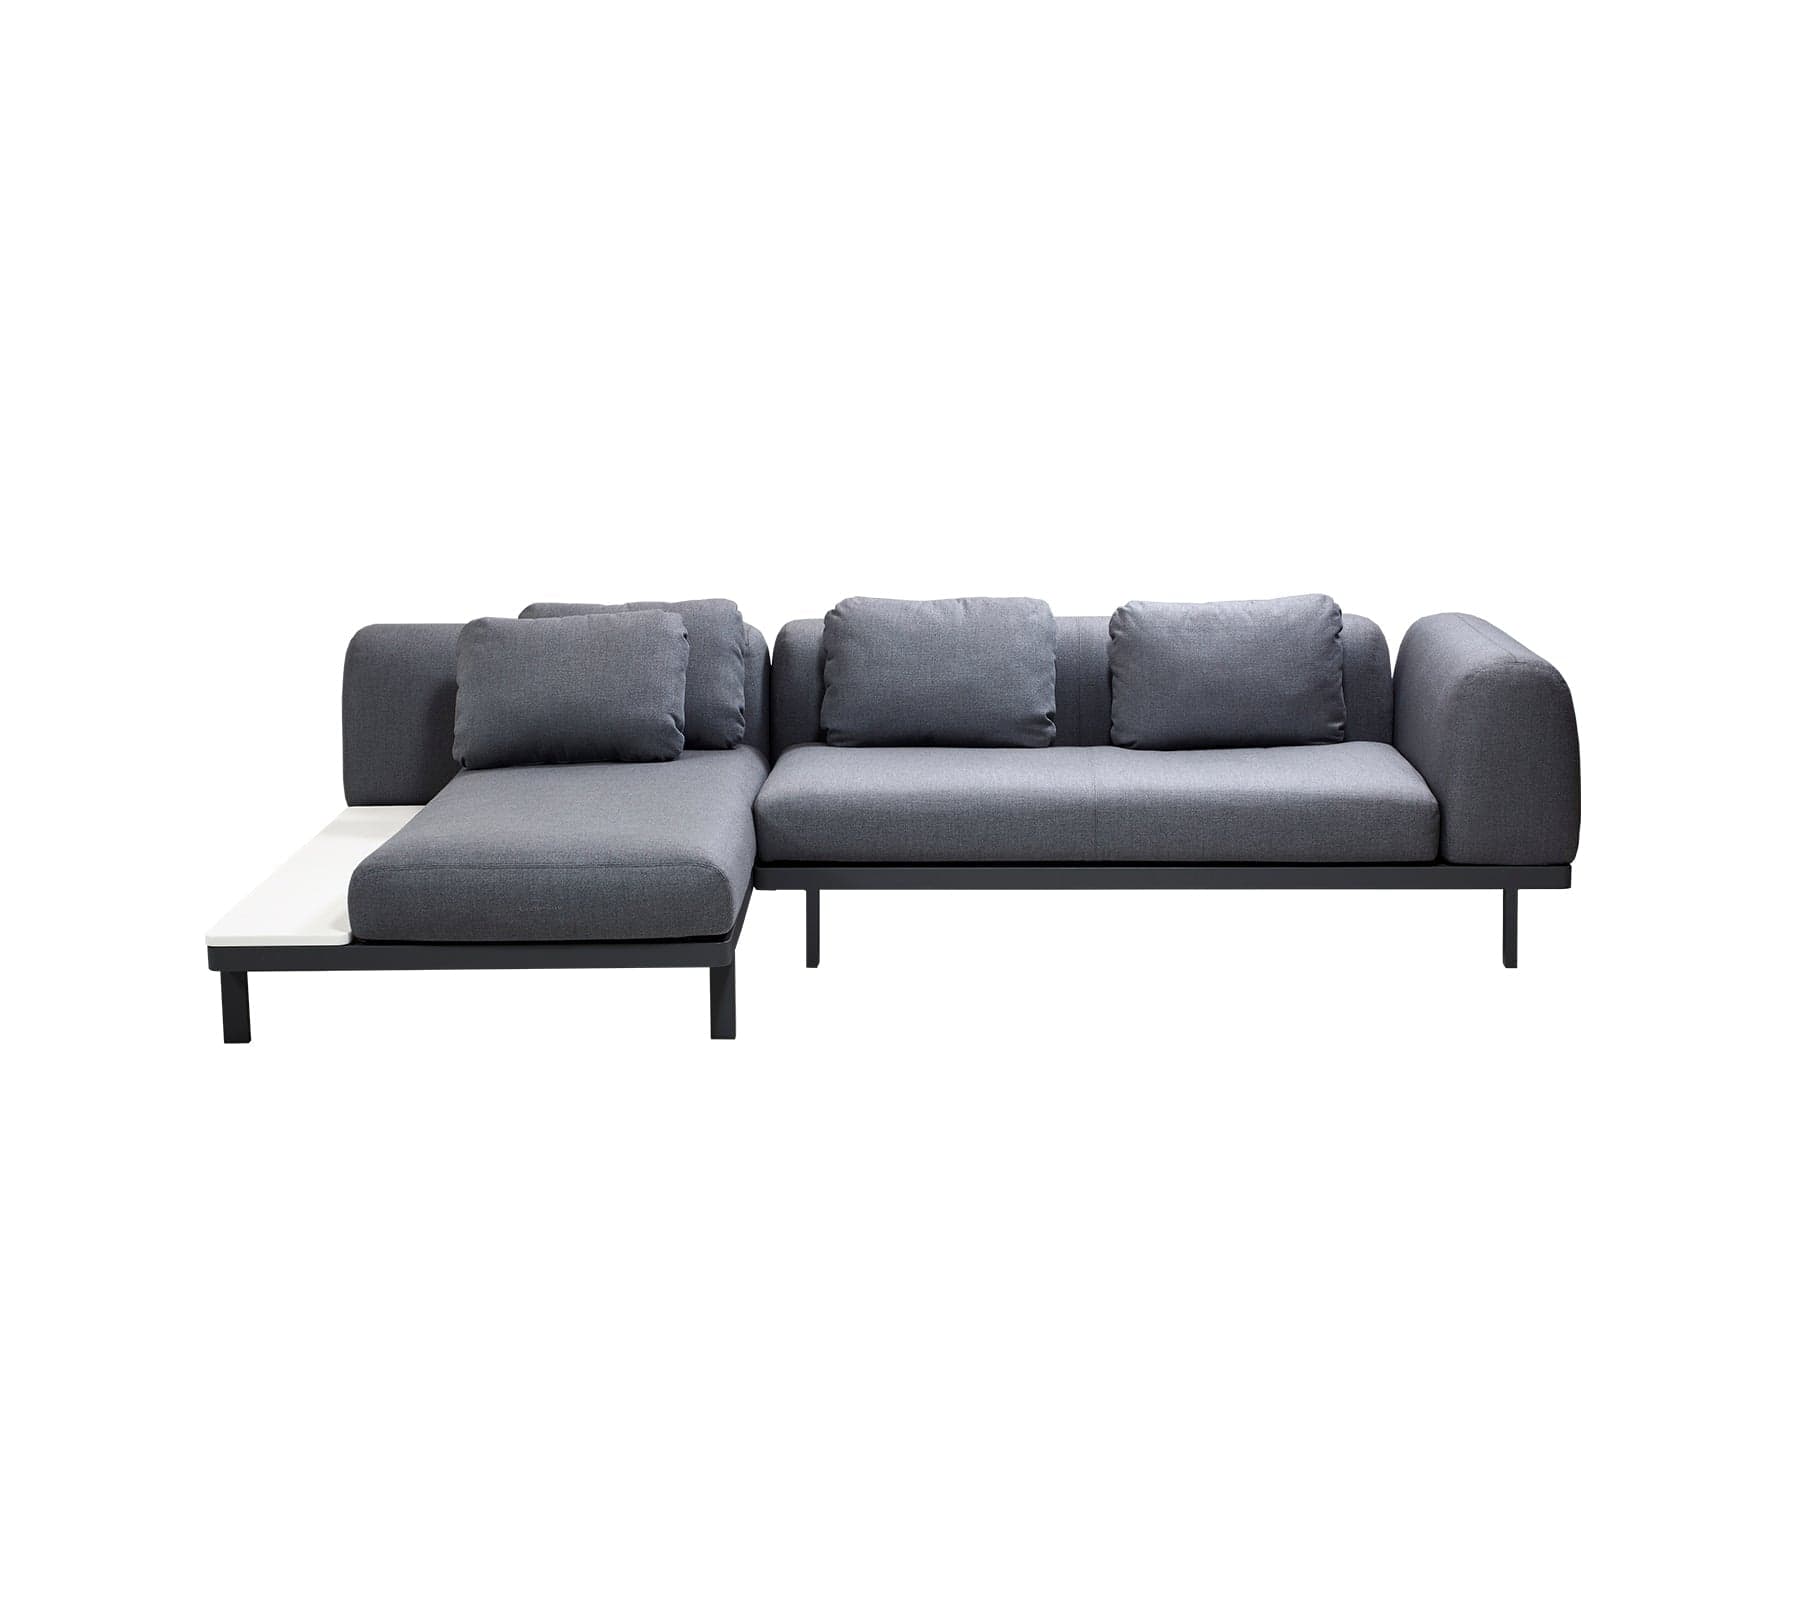 Cane-Line Denmark Cane-Line -Space lounge w/Cane-line AirTouch cushions (1)